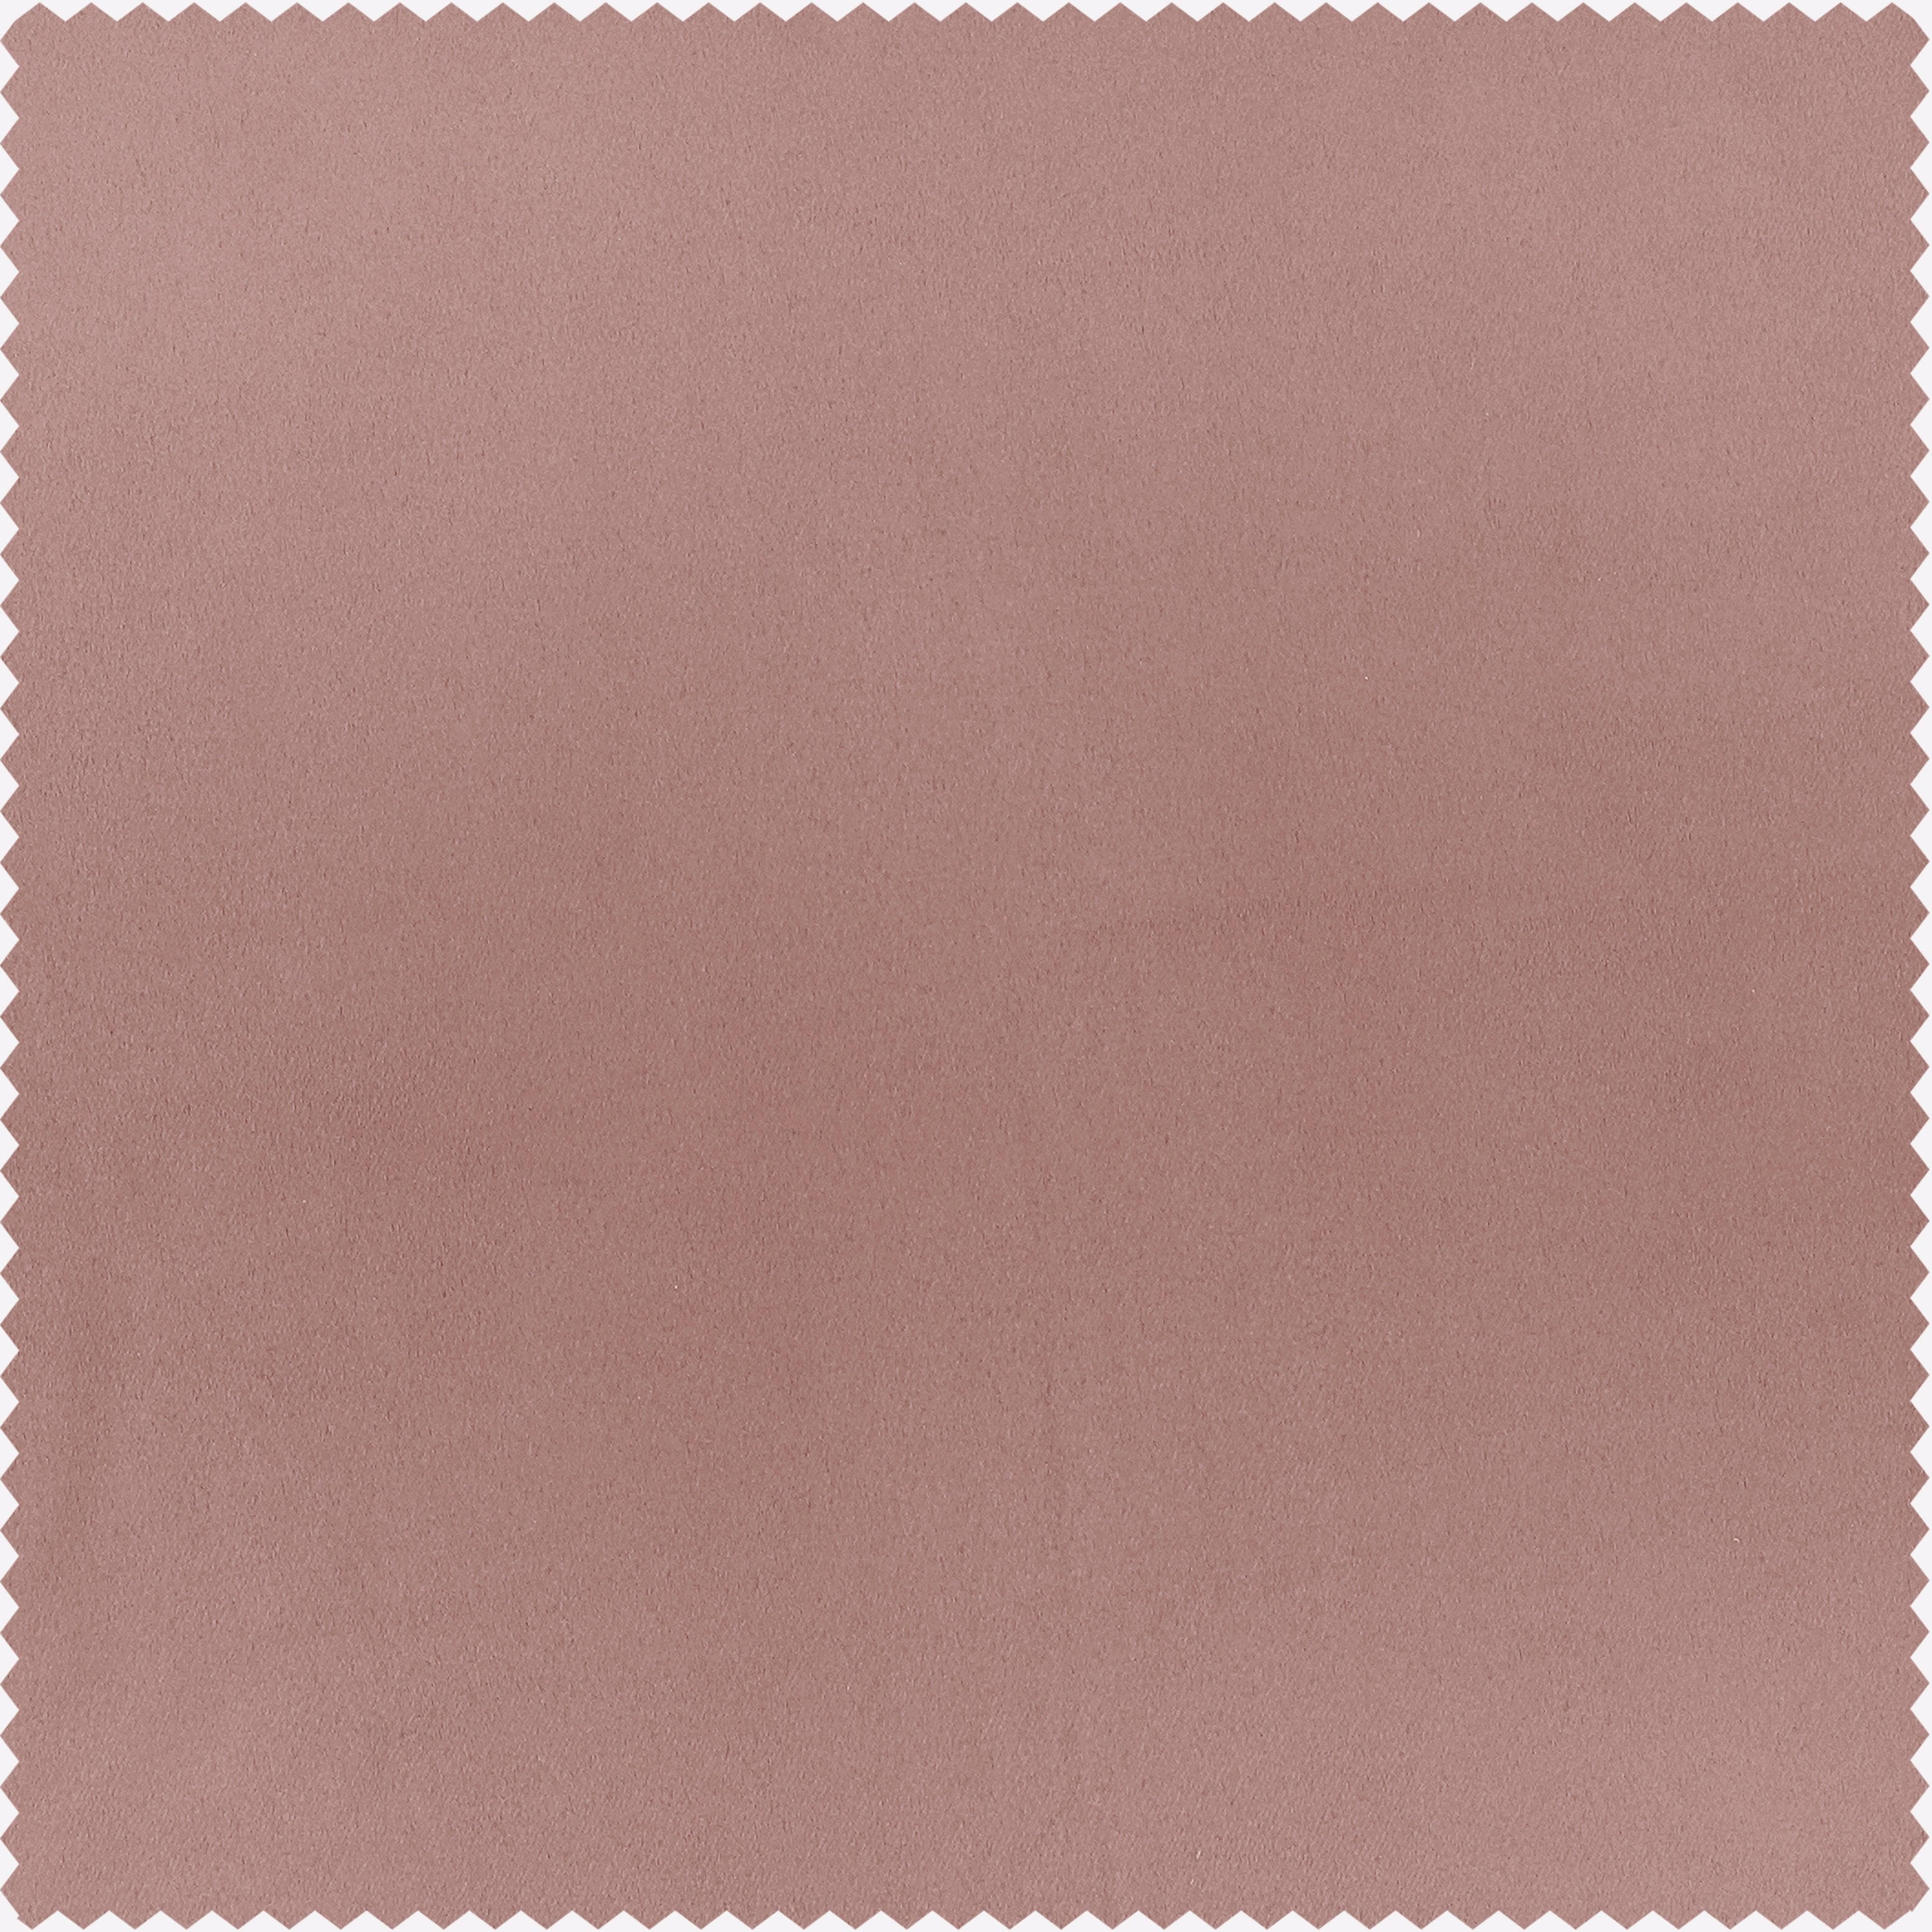 Fresco Blush Solid Polyester Swatch